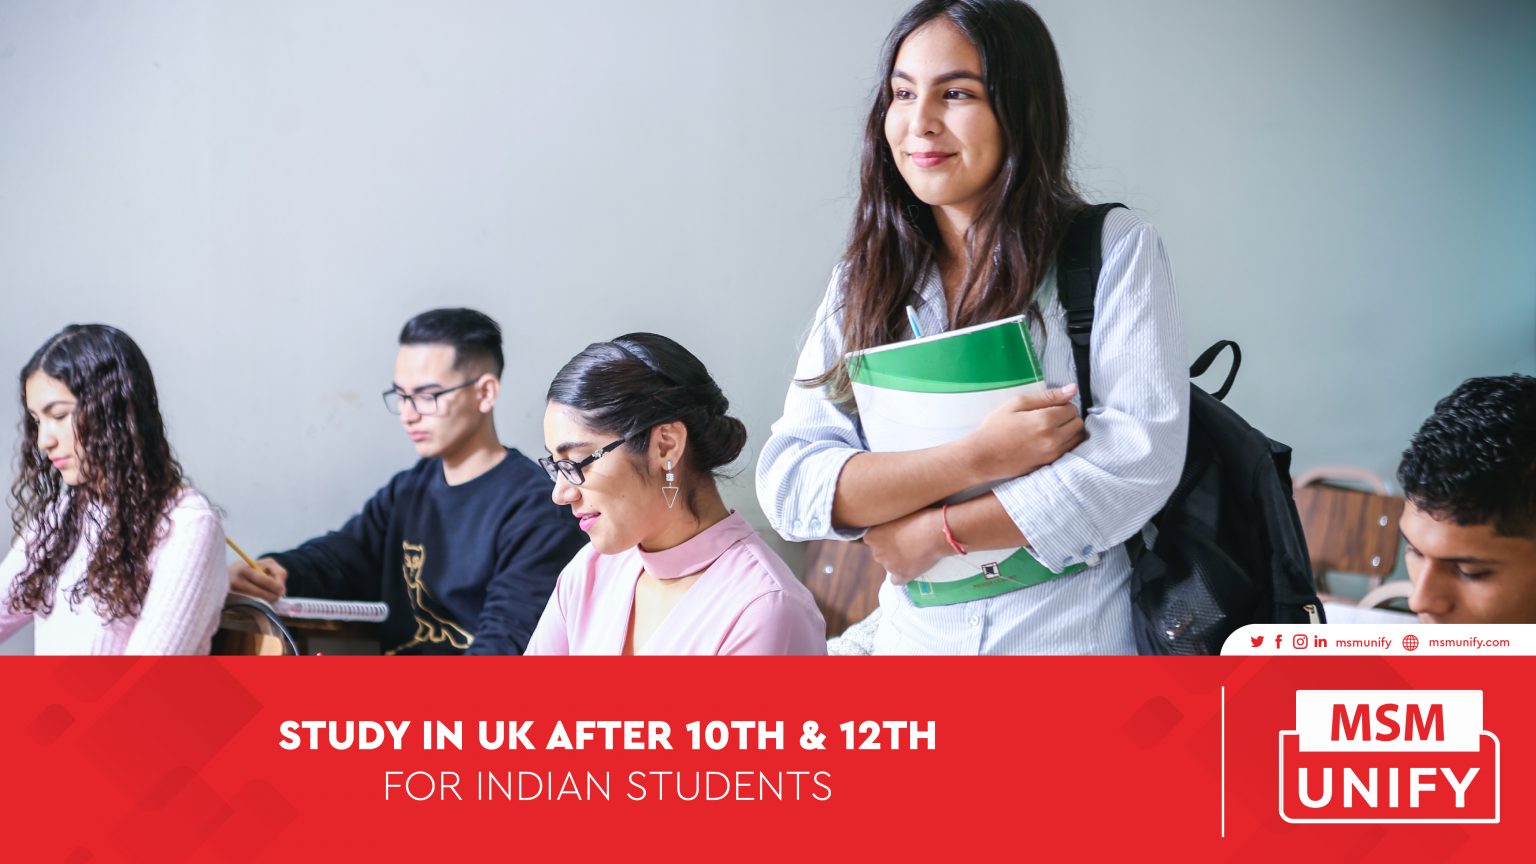 Study in the UK After 10th & 12th